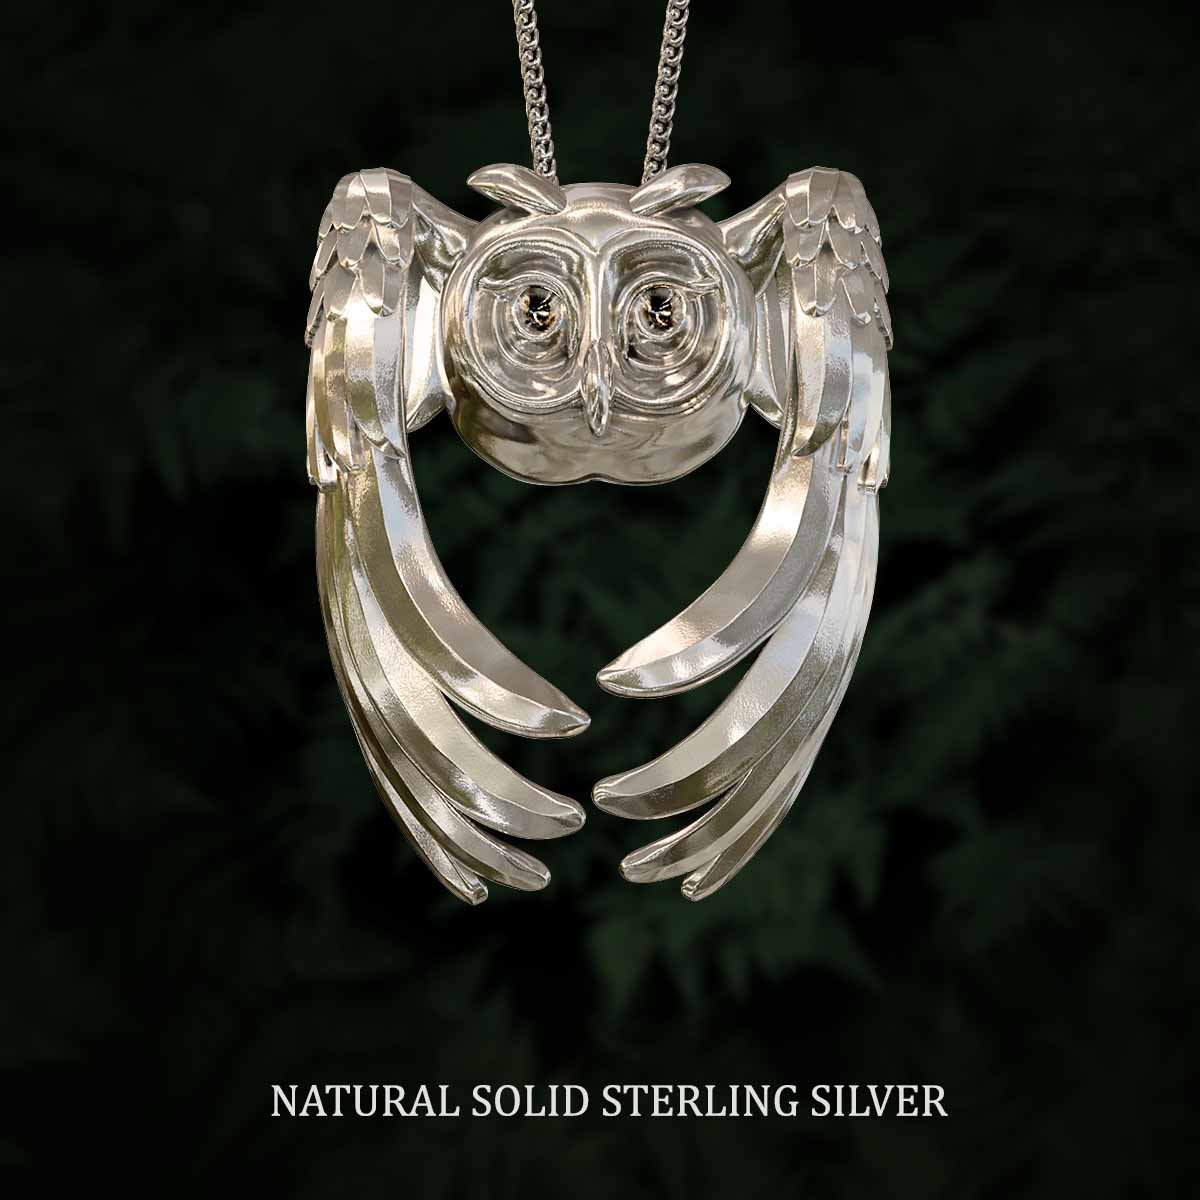     Natural-Satin-Polish-Solid-Sterling-Silver-Owl-Pendant-Jewelry-For-Necklace